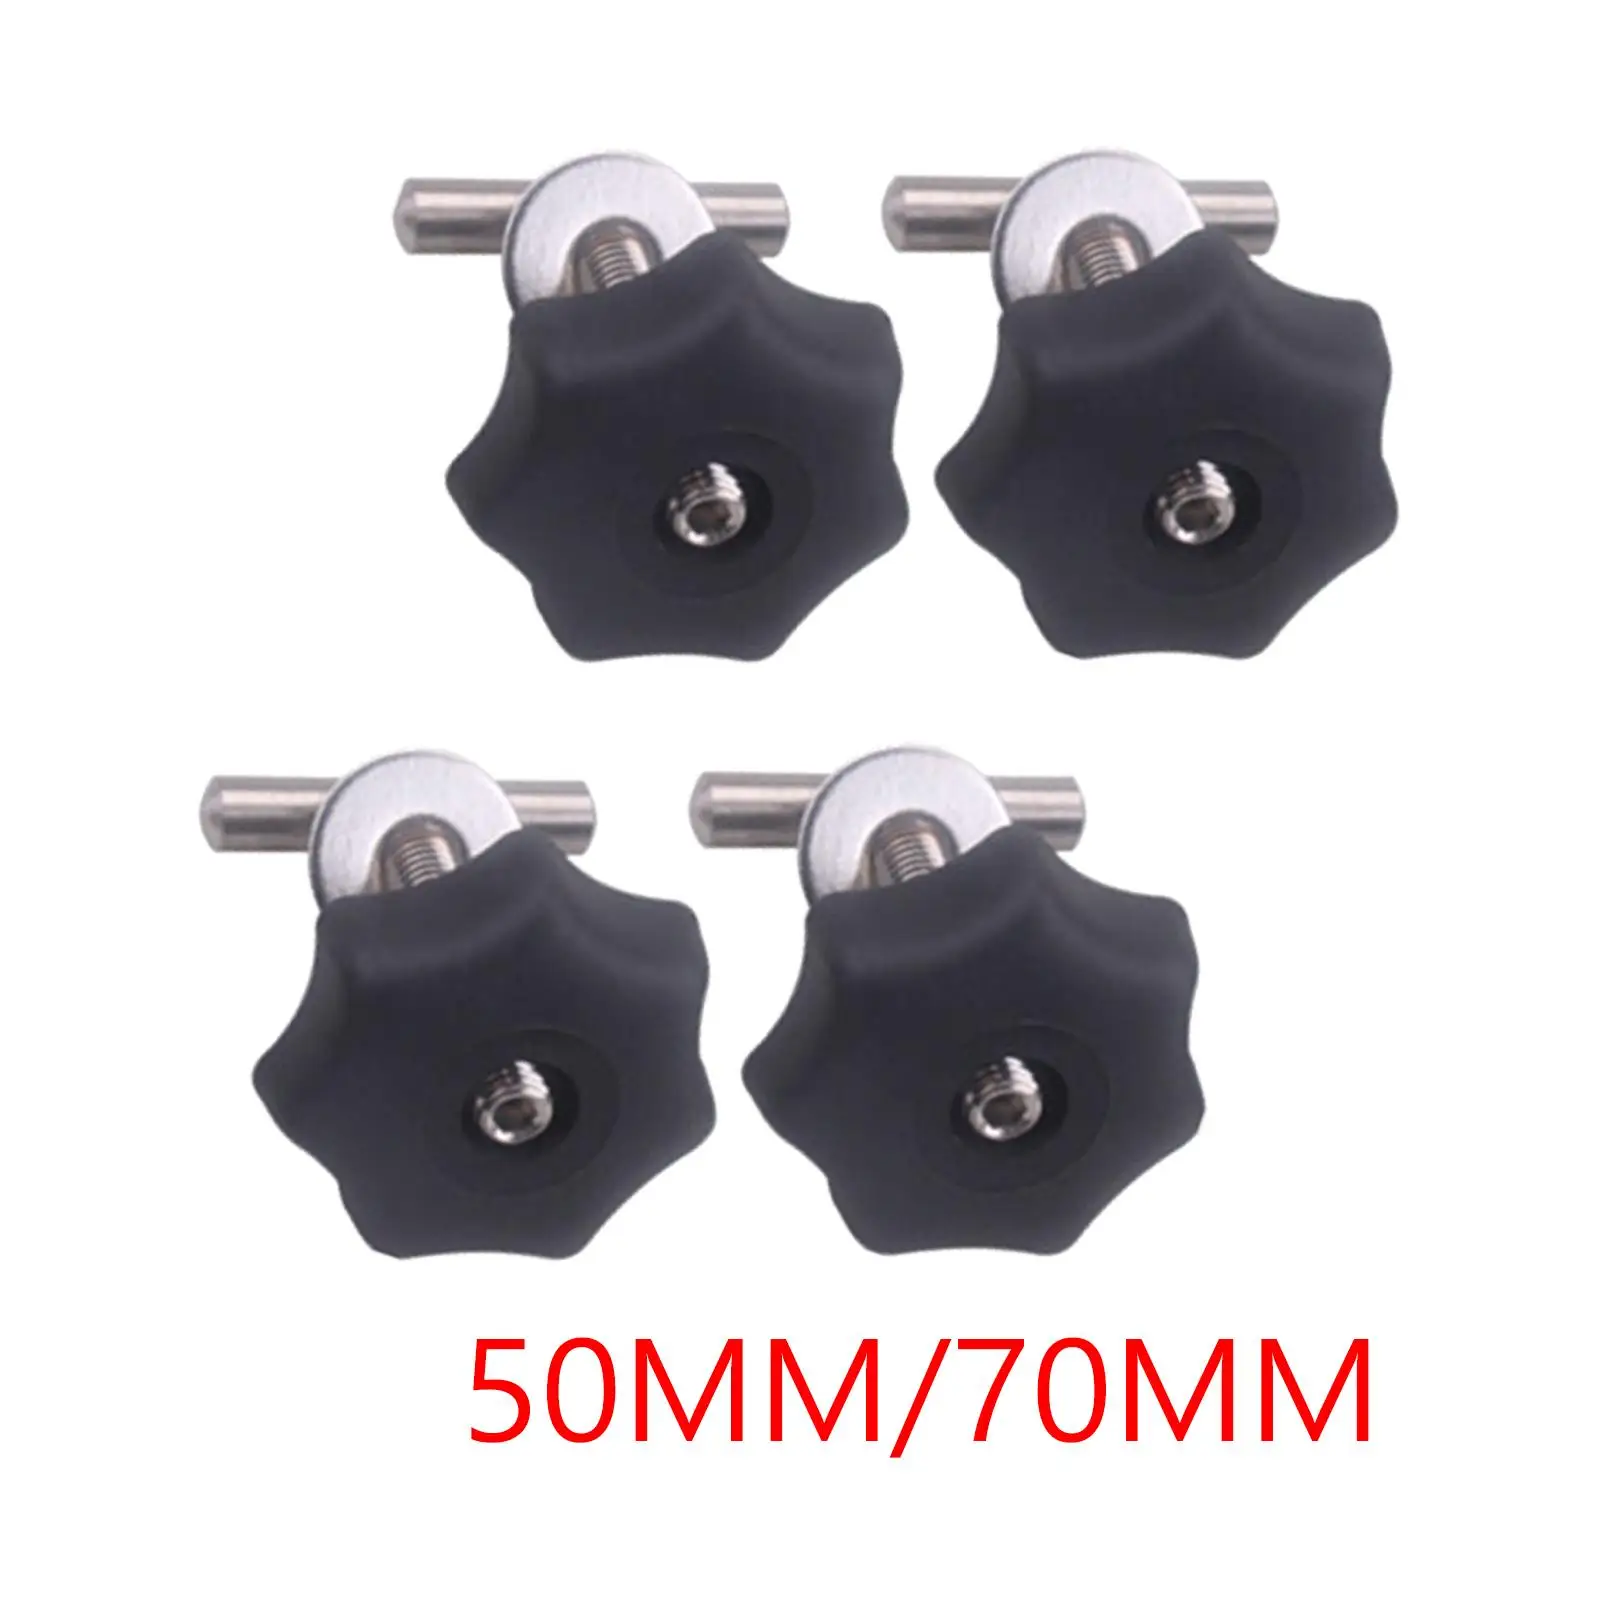 4Pcs Locking Rail Screws Bolt Set Mounting Accessories Stainless Steel Stable Fixing Screws set for VW T5 T6 Multiflexboard